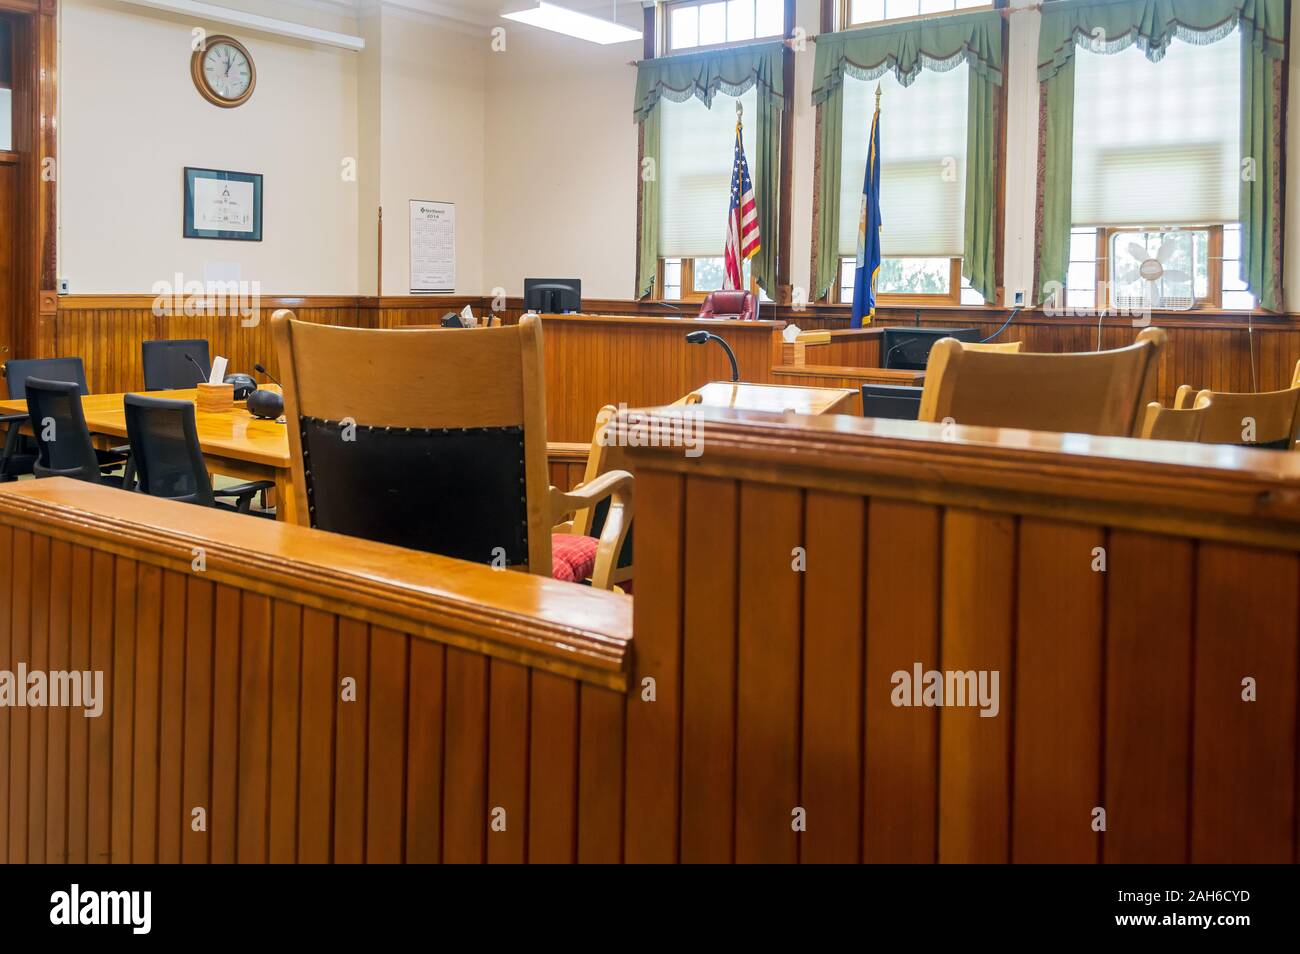 Dillon, Montana - July 23, 2014: A Courtroom in the Beaverhead County Courthouse Stock Photo